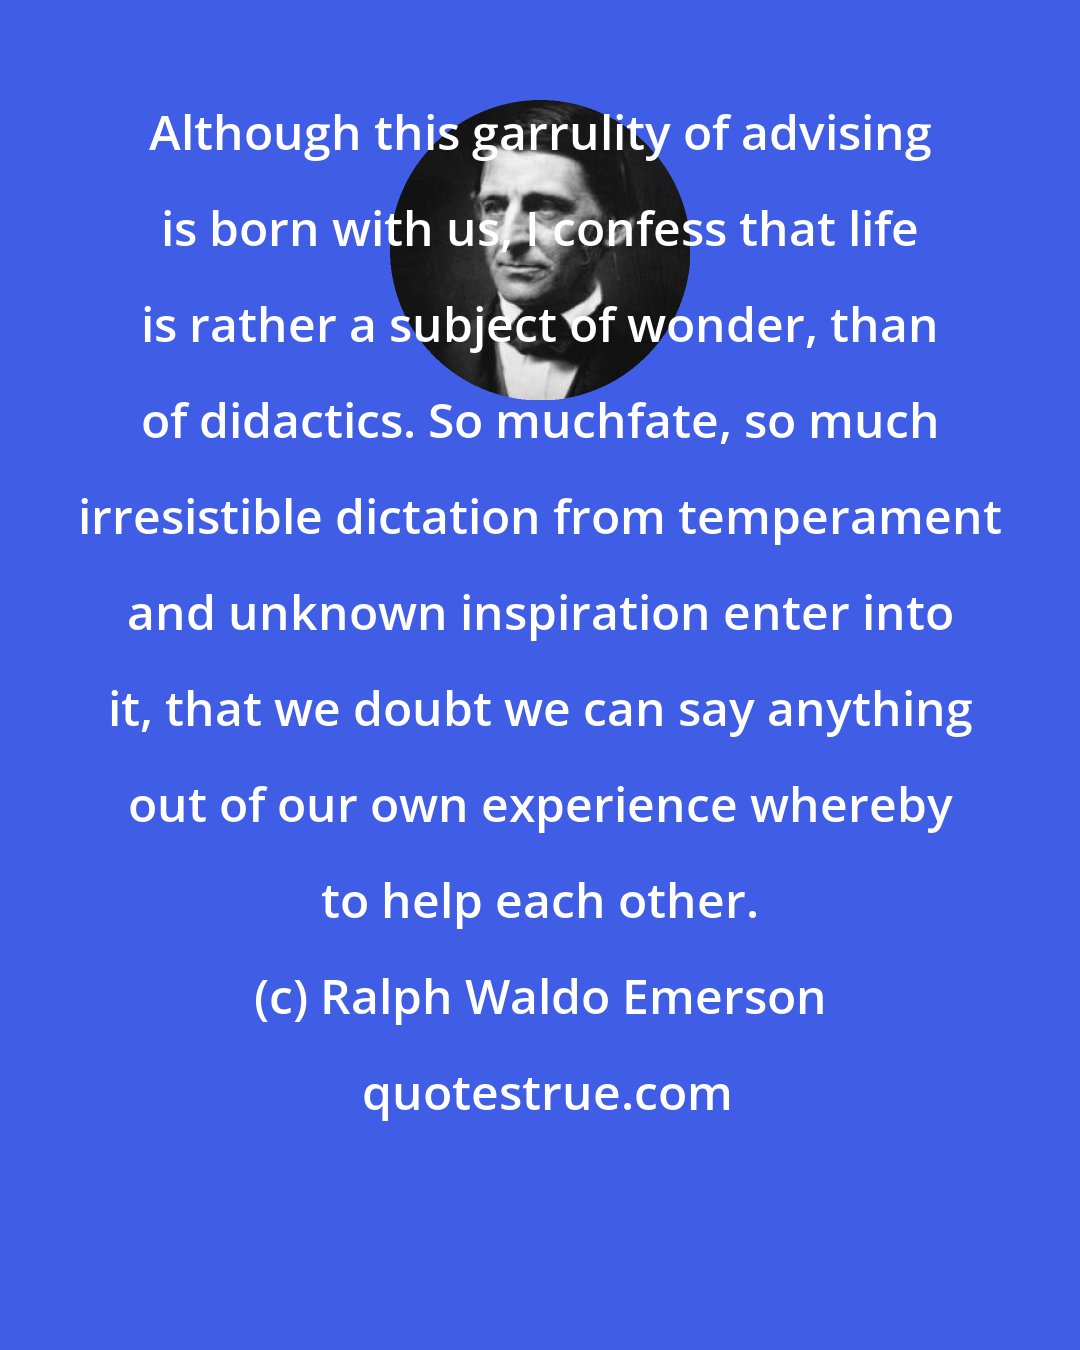 Ralph Waldo Emerson: Although this garrulity of advising is born with us, I confess that life is rather a subject of wonder, than of didactics. So muchfate, so much irresistible dictation from temperament and unknown inspiration enter into it, that we doubt we can say anything out of our own experience whereby to help each other.